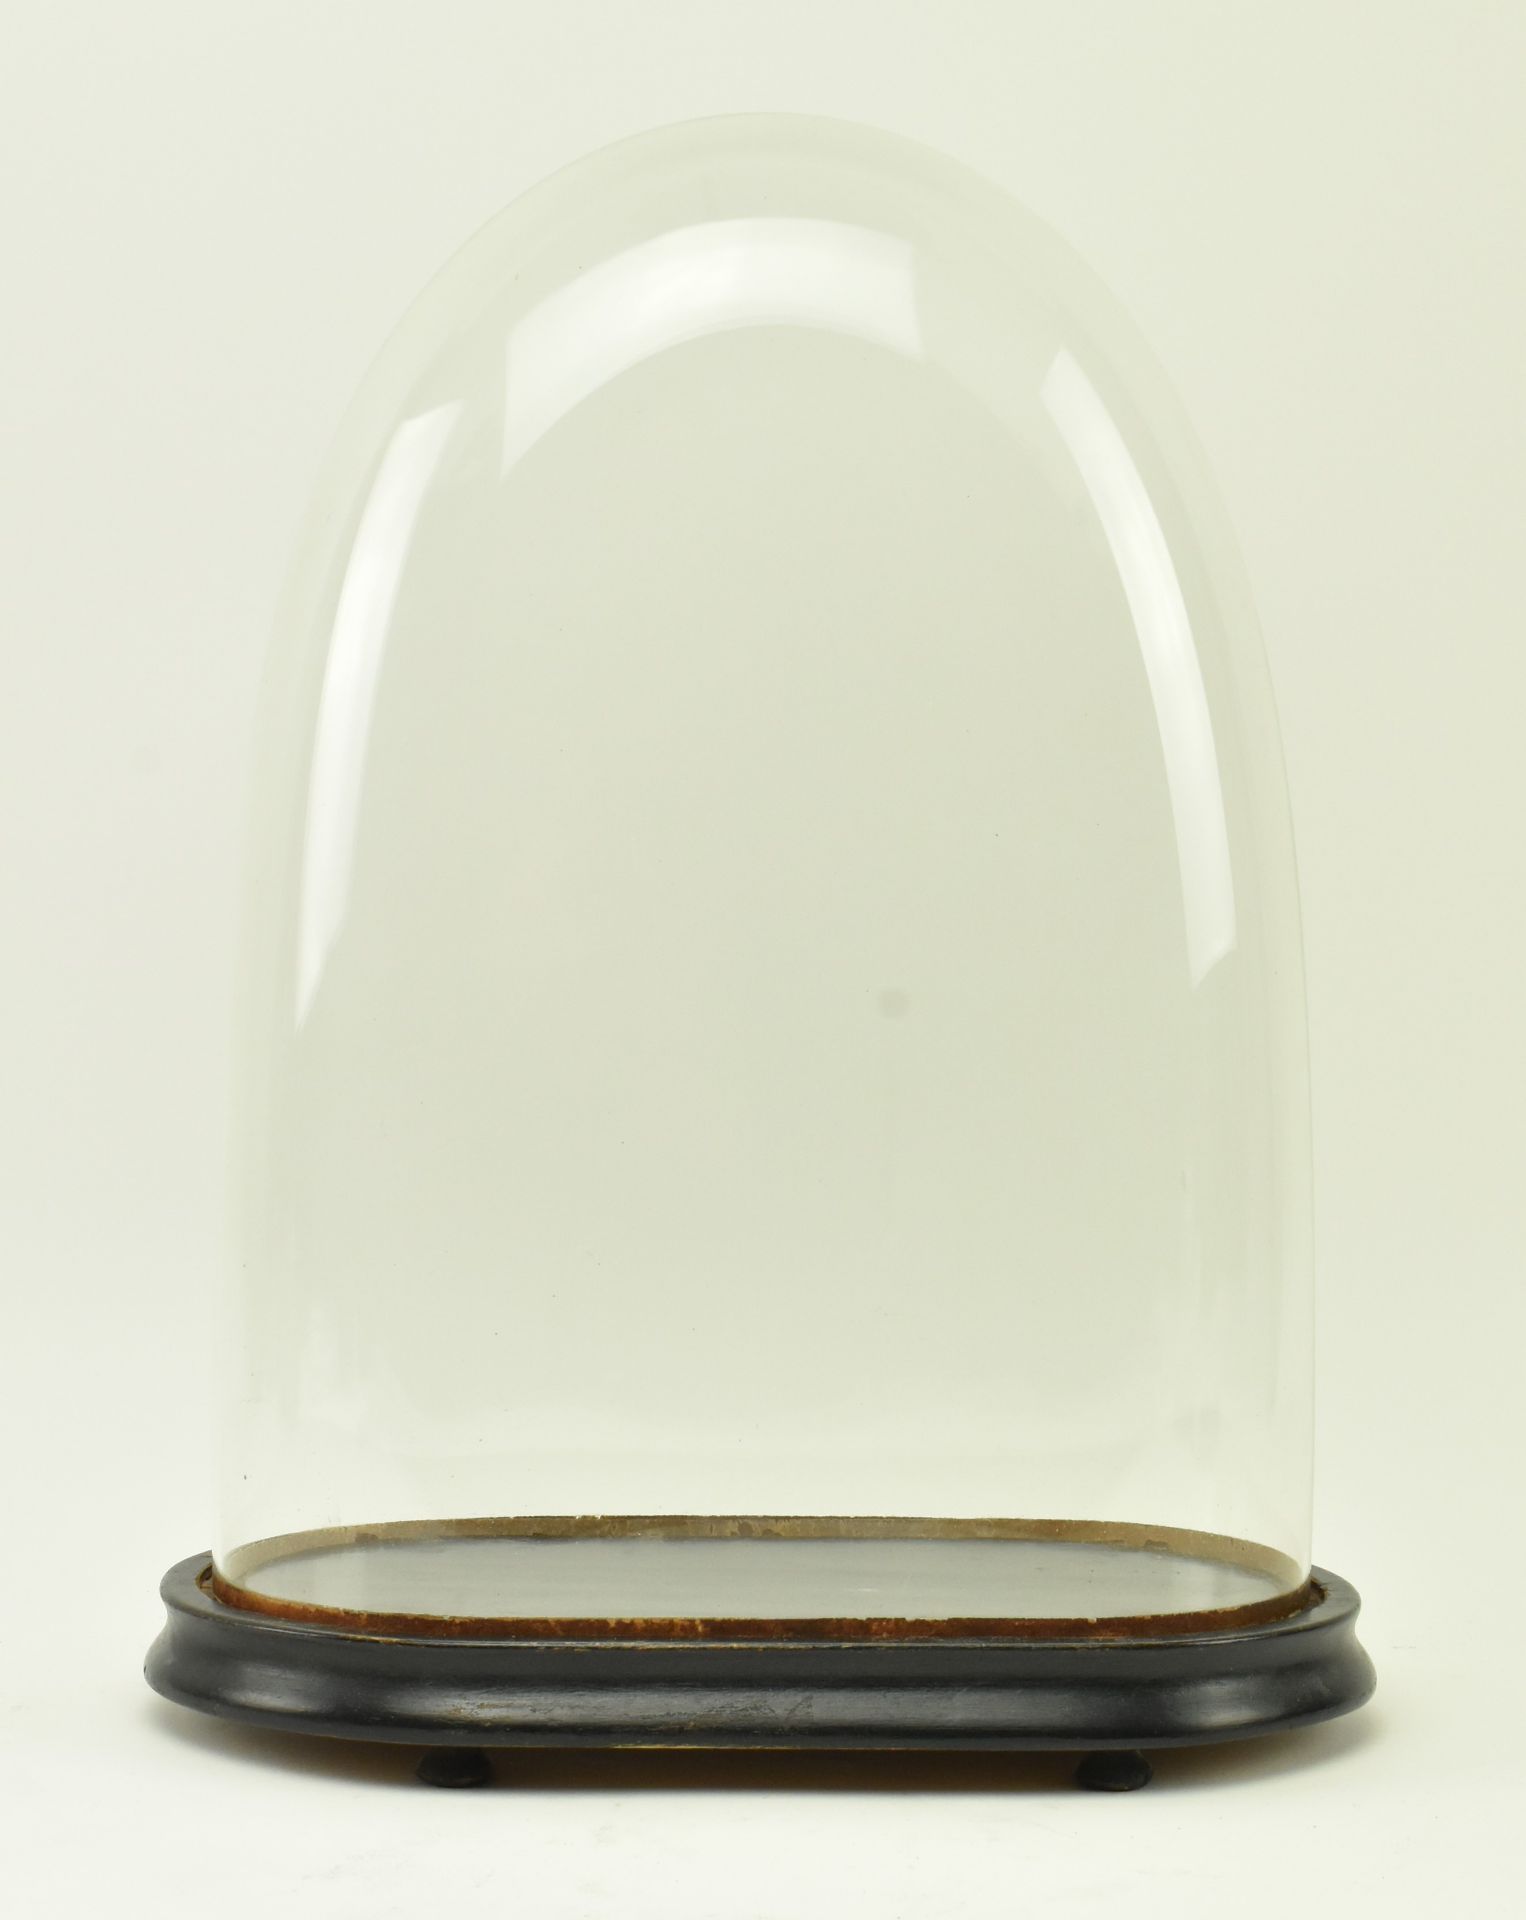 VICTORIAN GLASS DISPLAY DOME AND MAHOGANY STAND